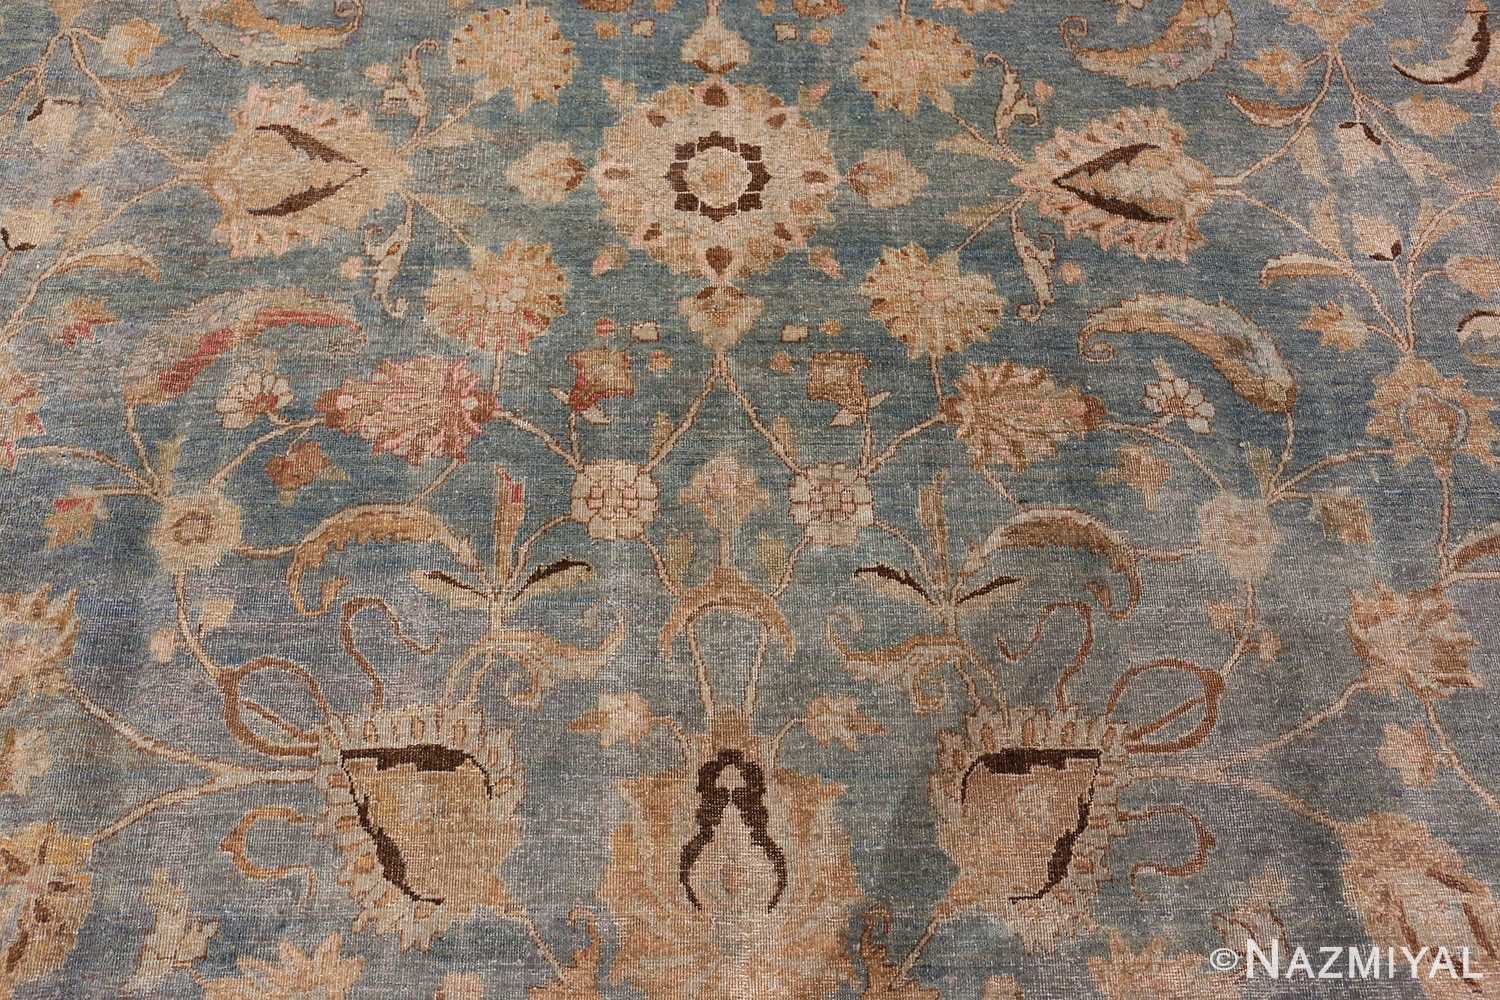 A detailed pattern picture of the antique persian khorassan rug #49843 from Nazmiyal Antique Rugs NYC